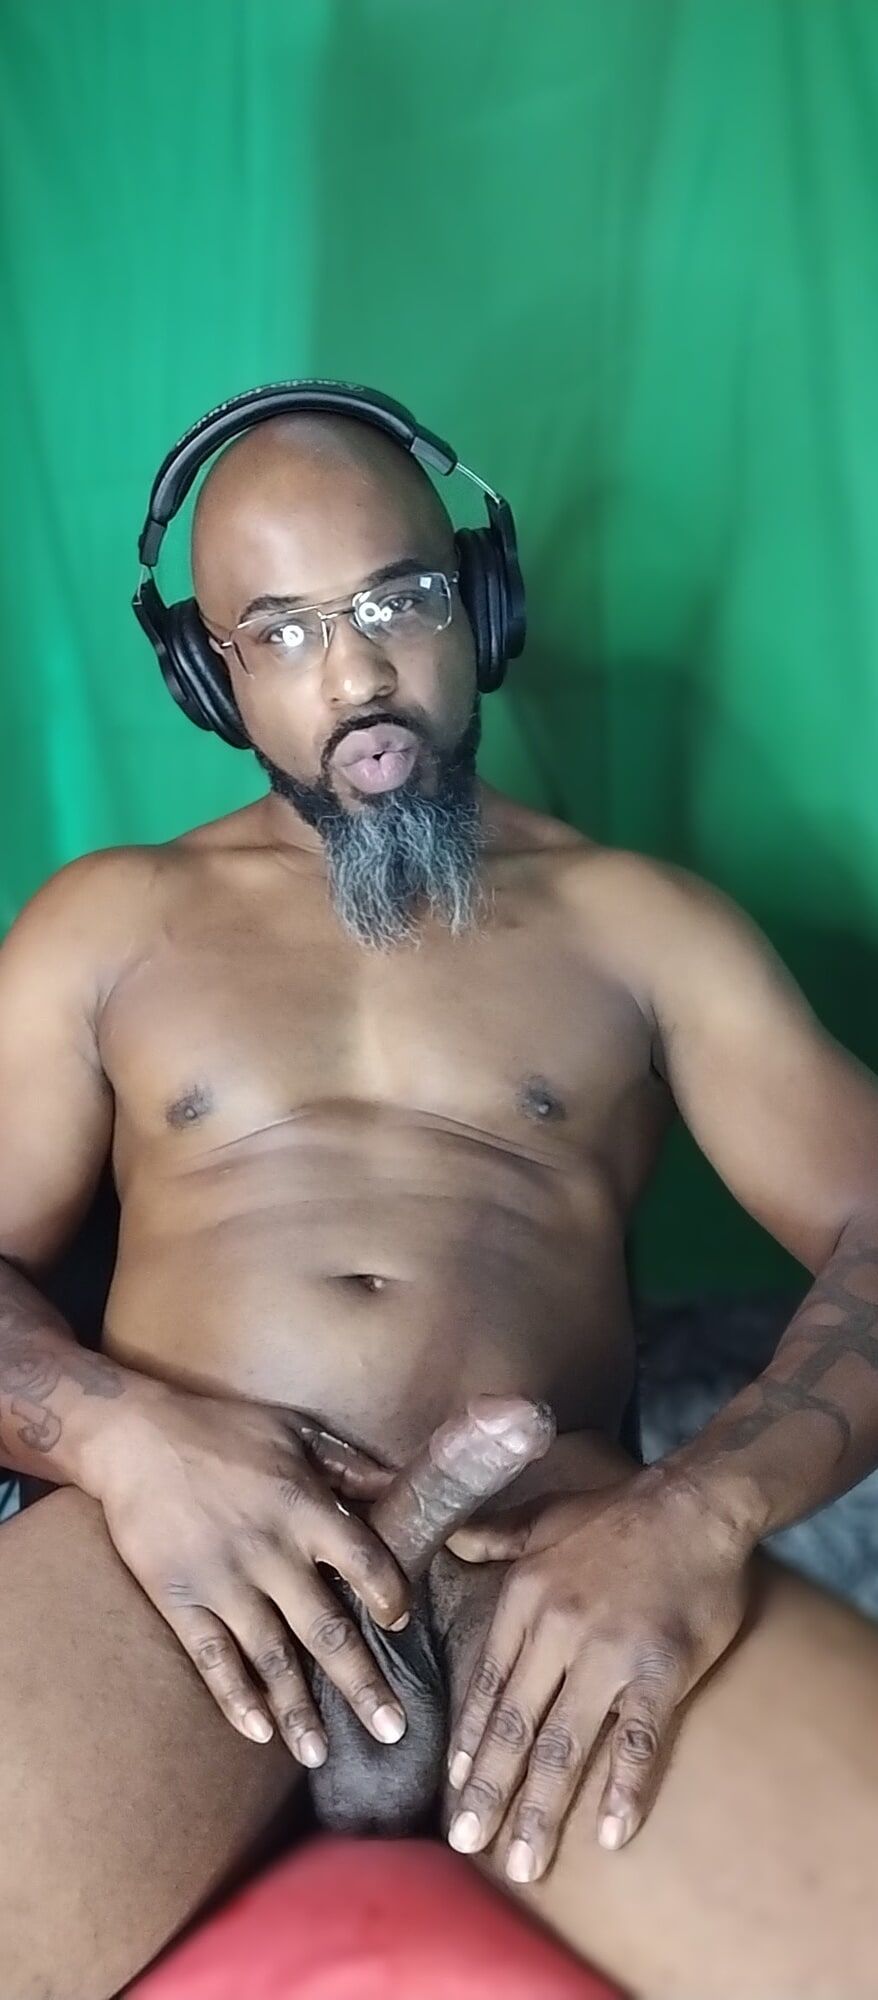 Do you want me in your mouth or pussy? #4